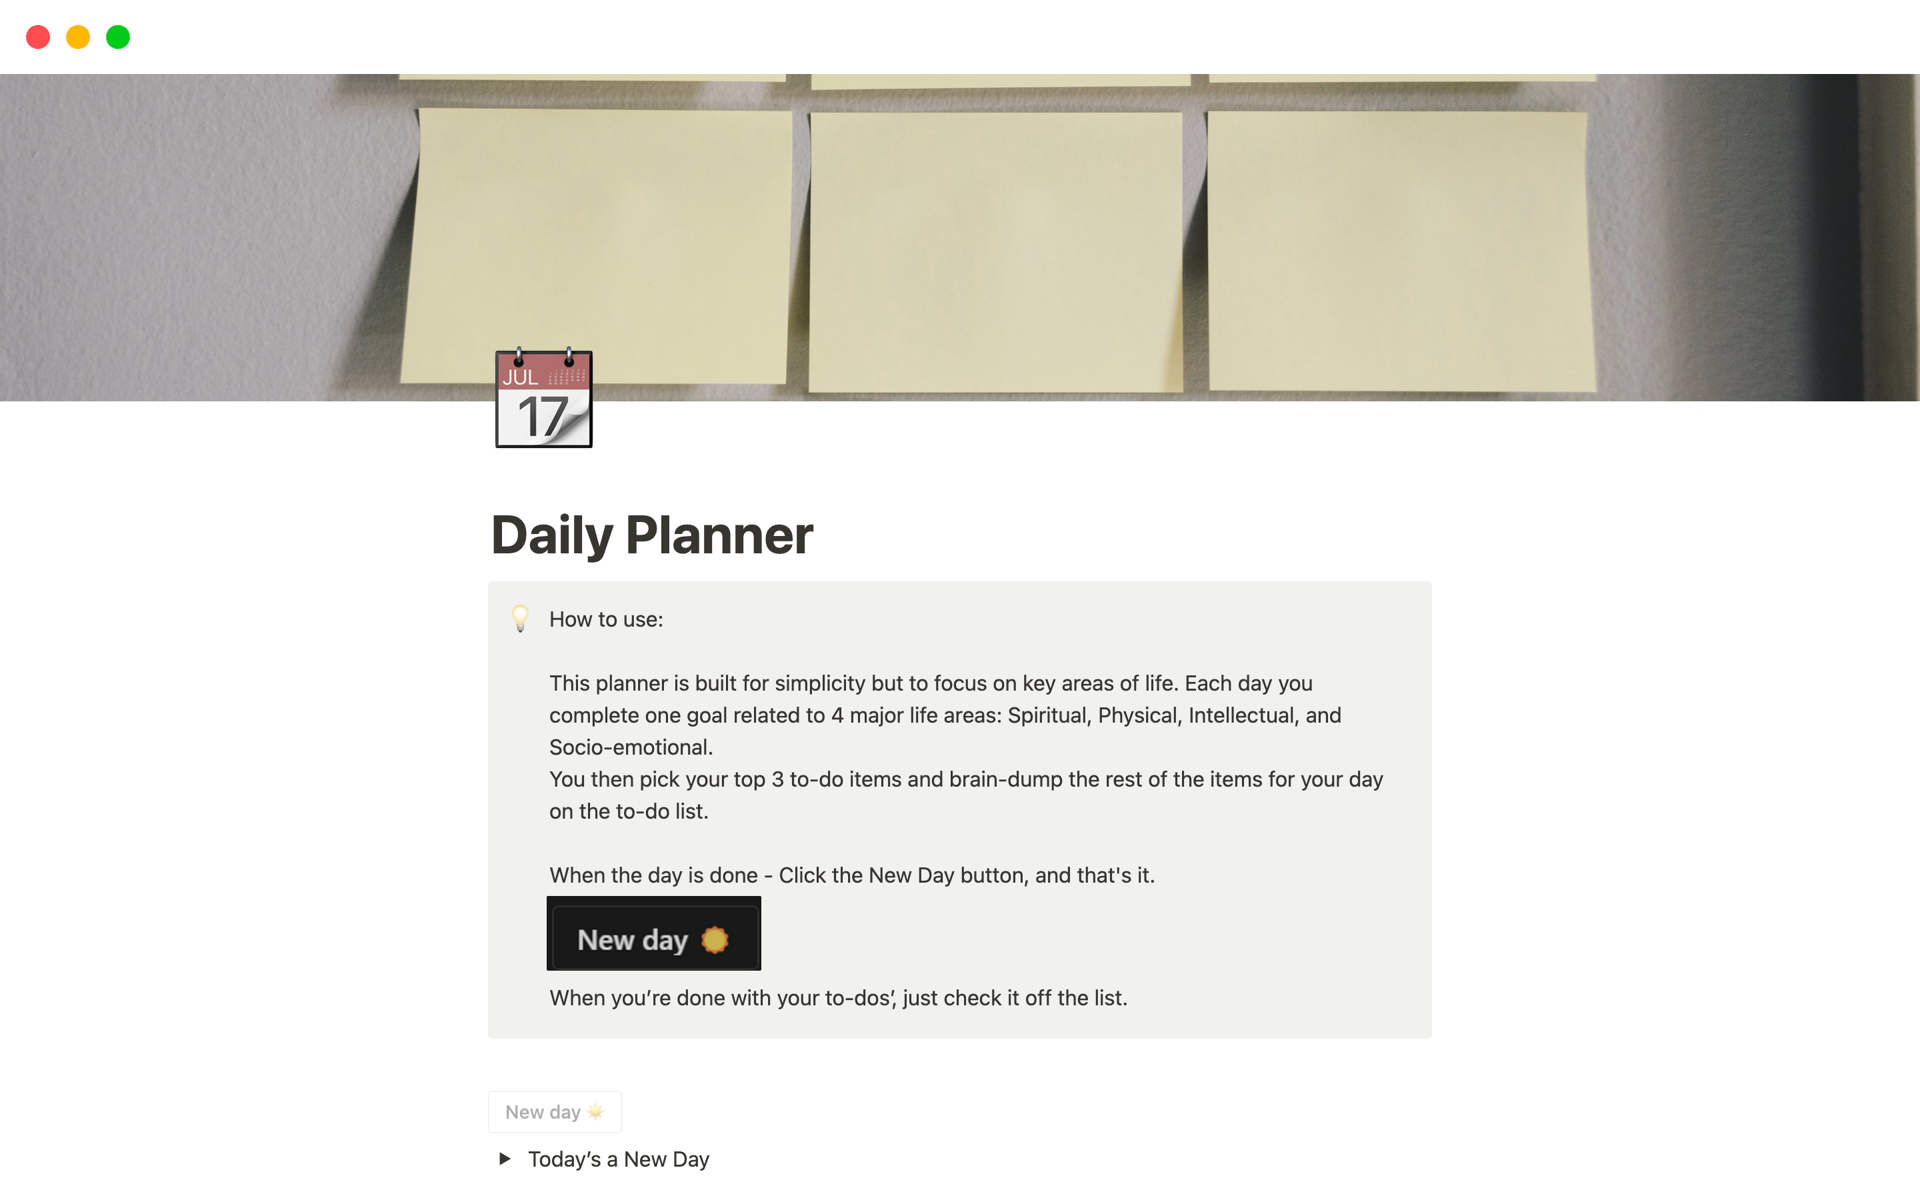 Optimize each day with a simple, handy planner.